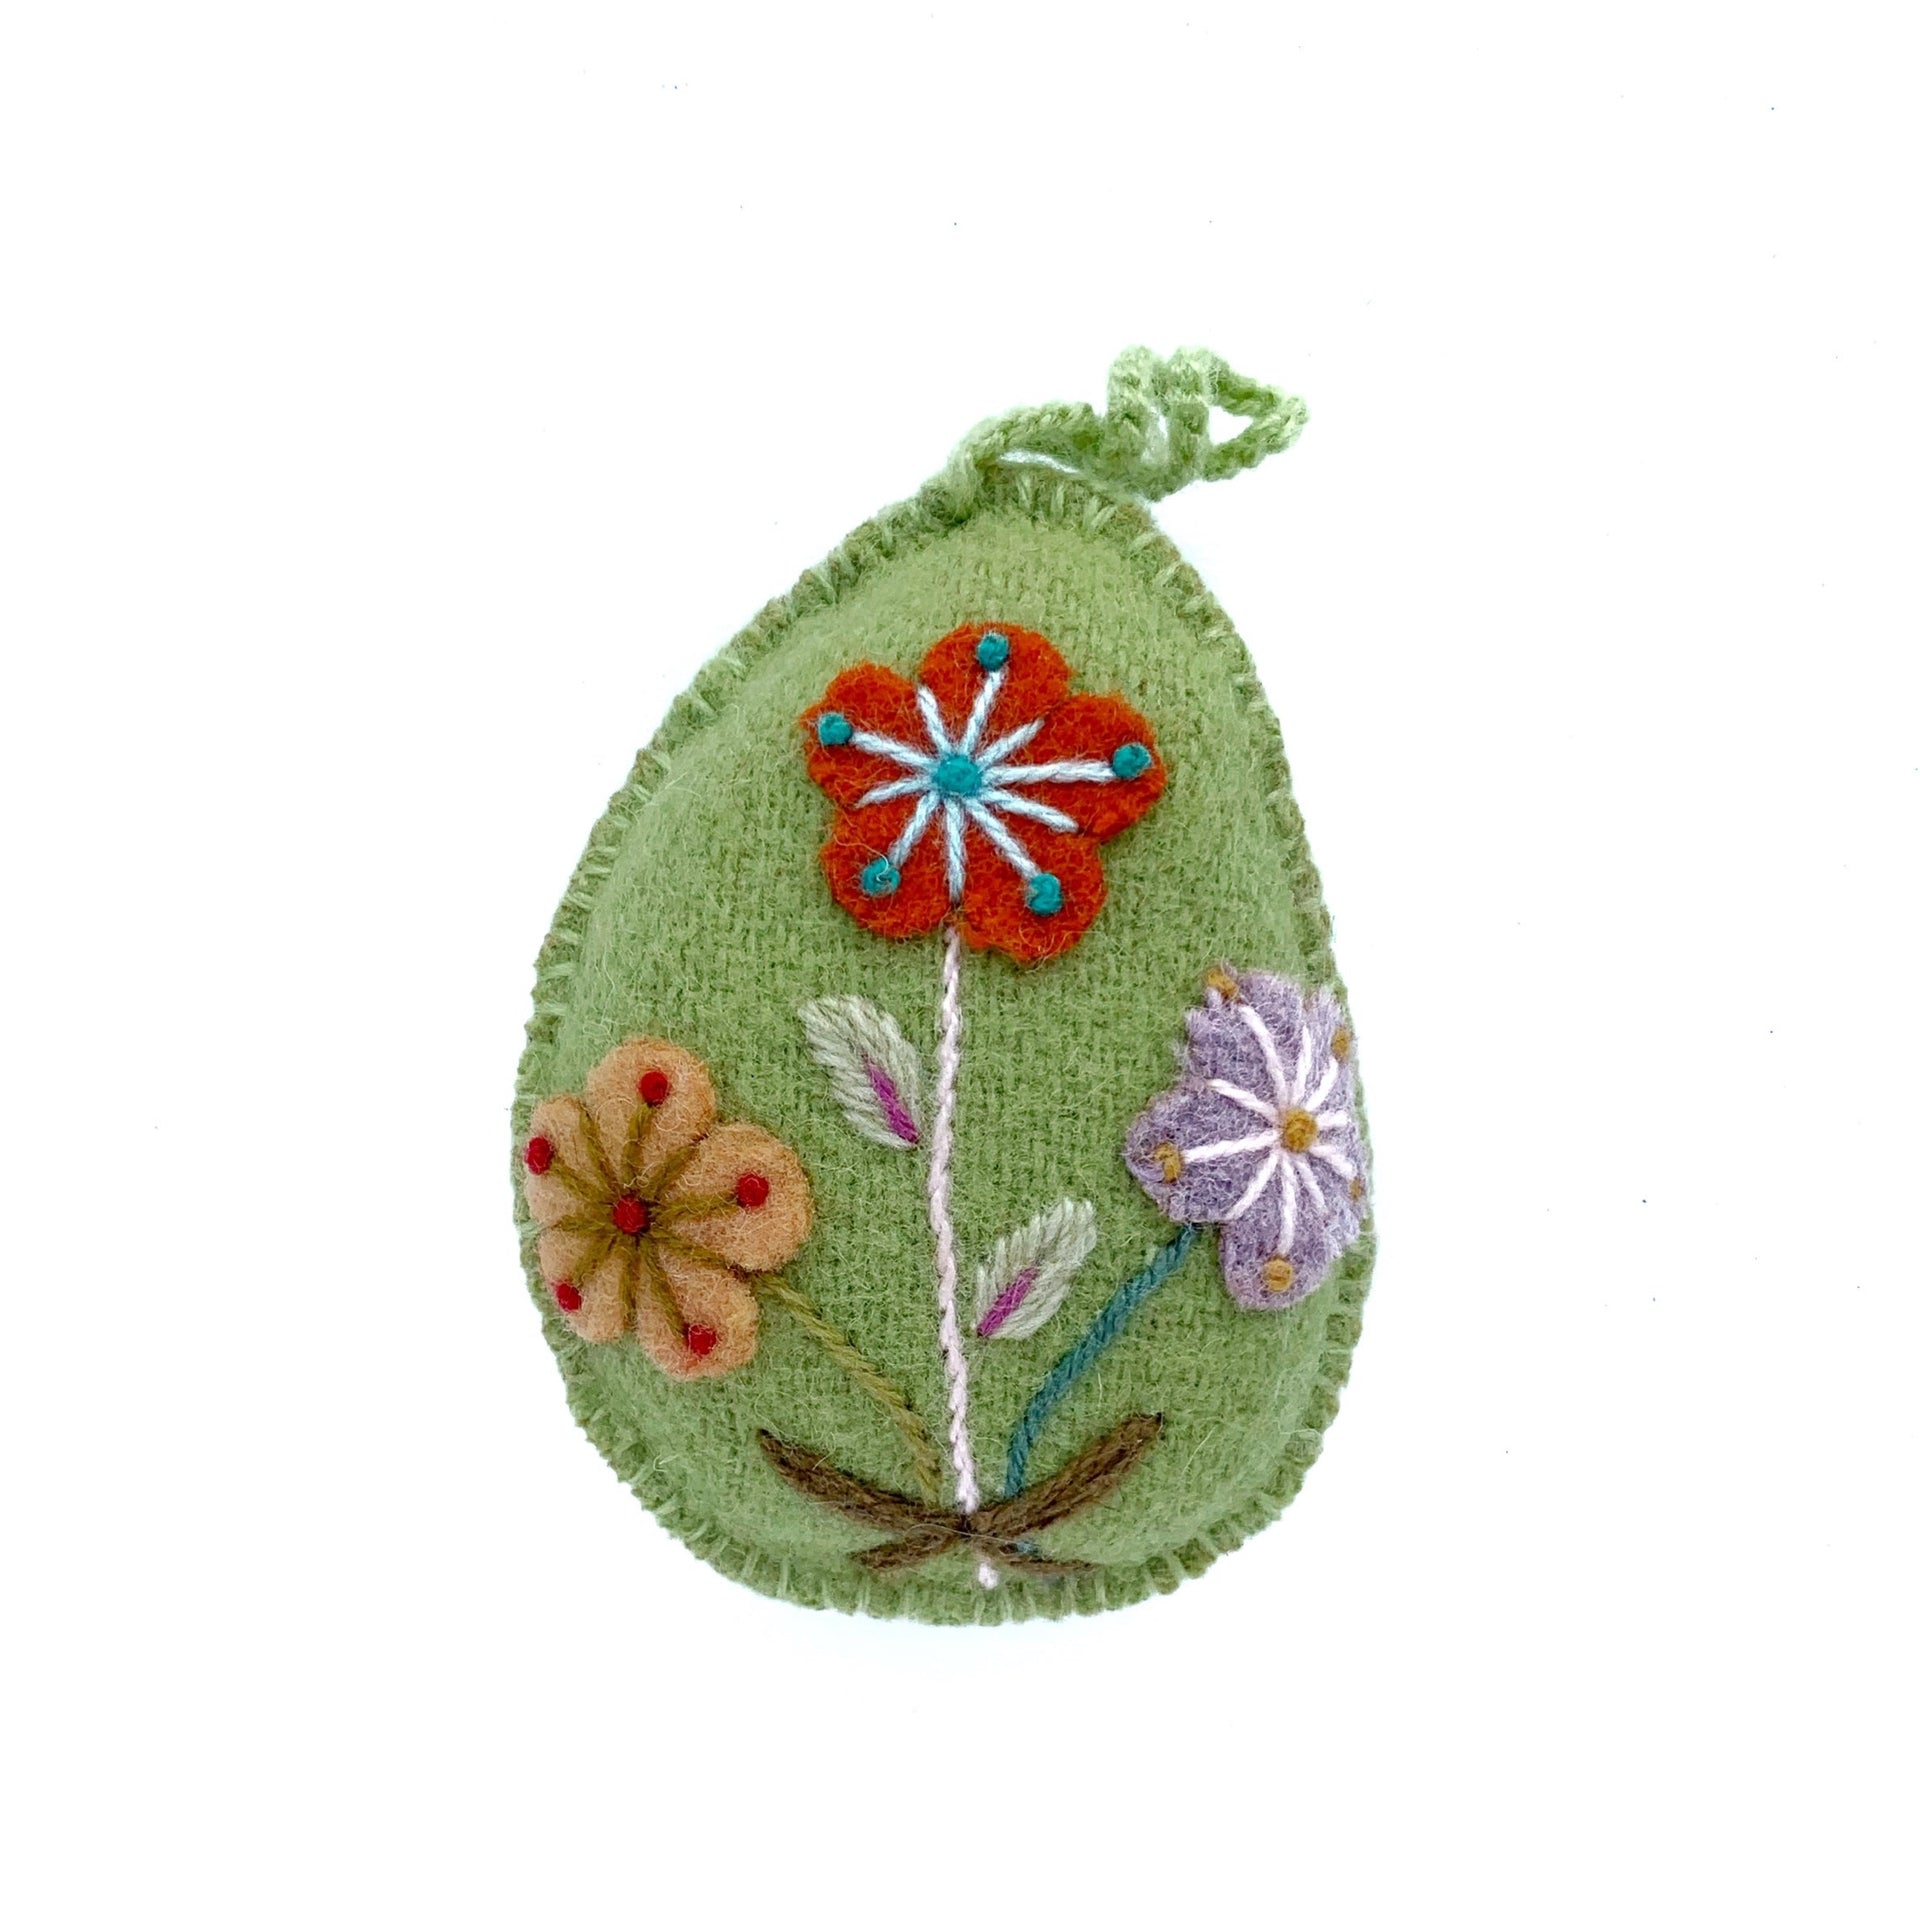 Soft green pastel Easter egg ornament with hand embroidered flowers and designs.